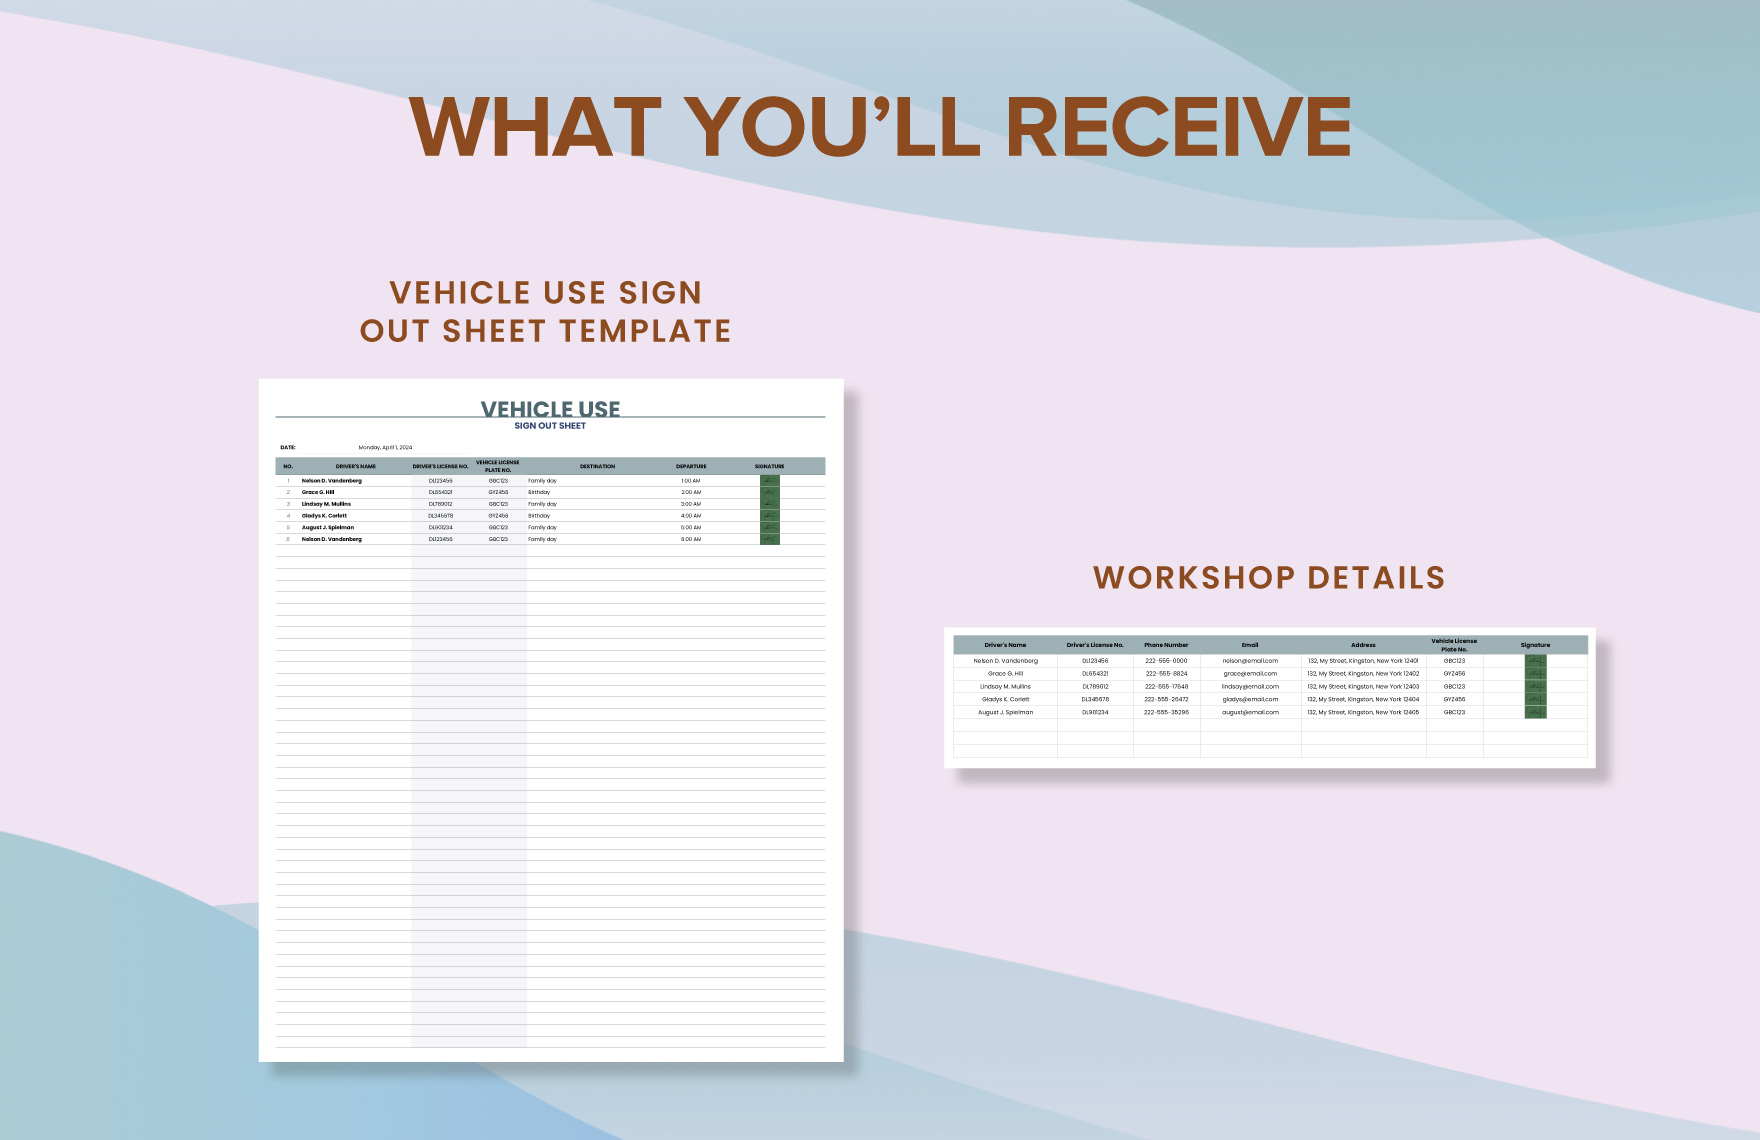 Vehicle Use Sign Out Sheet Template